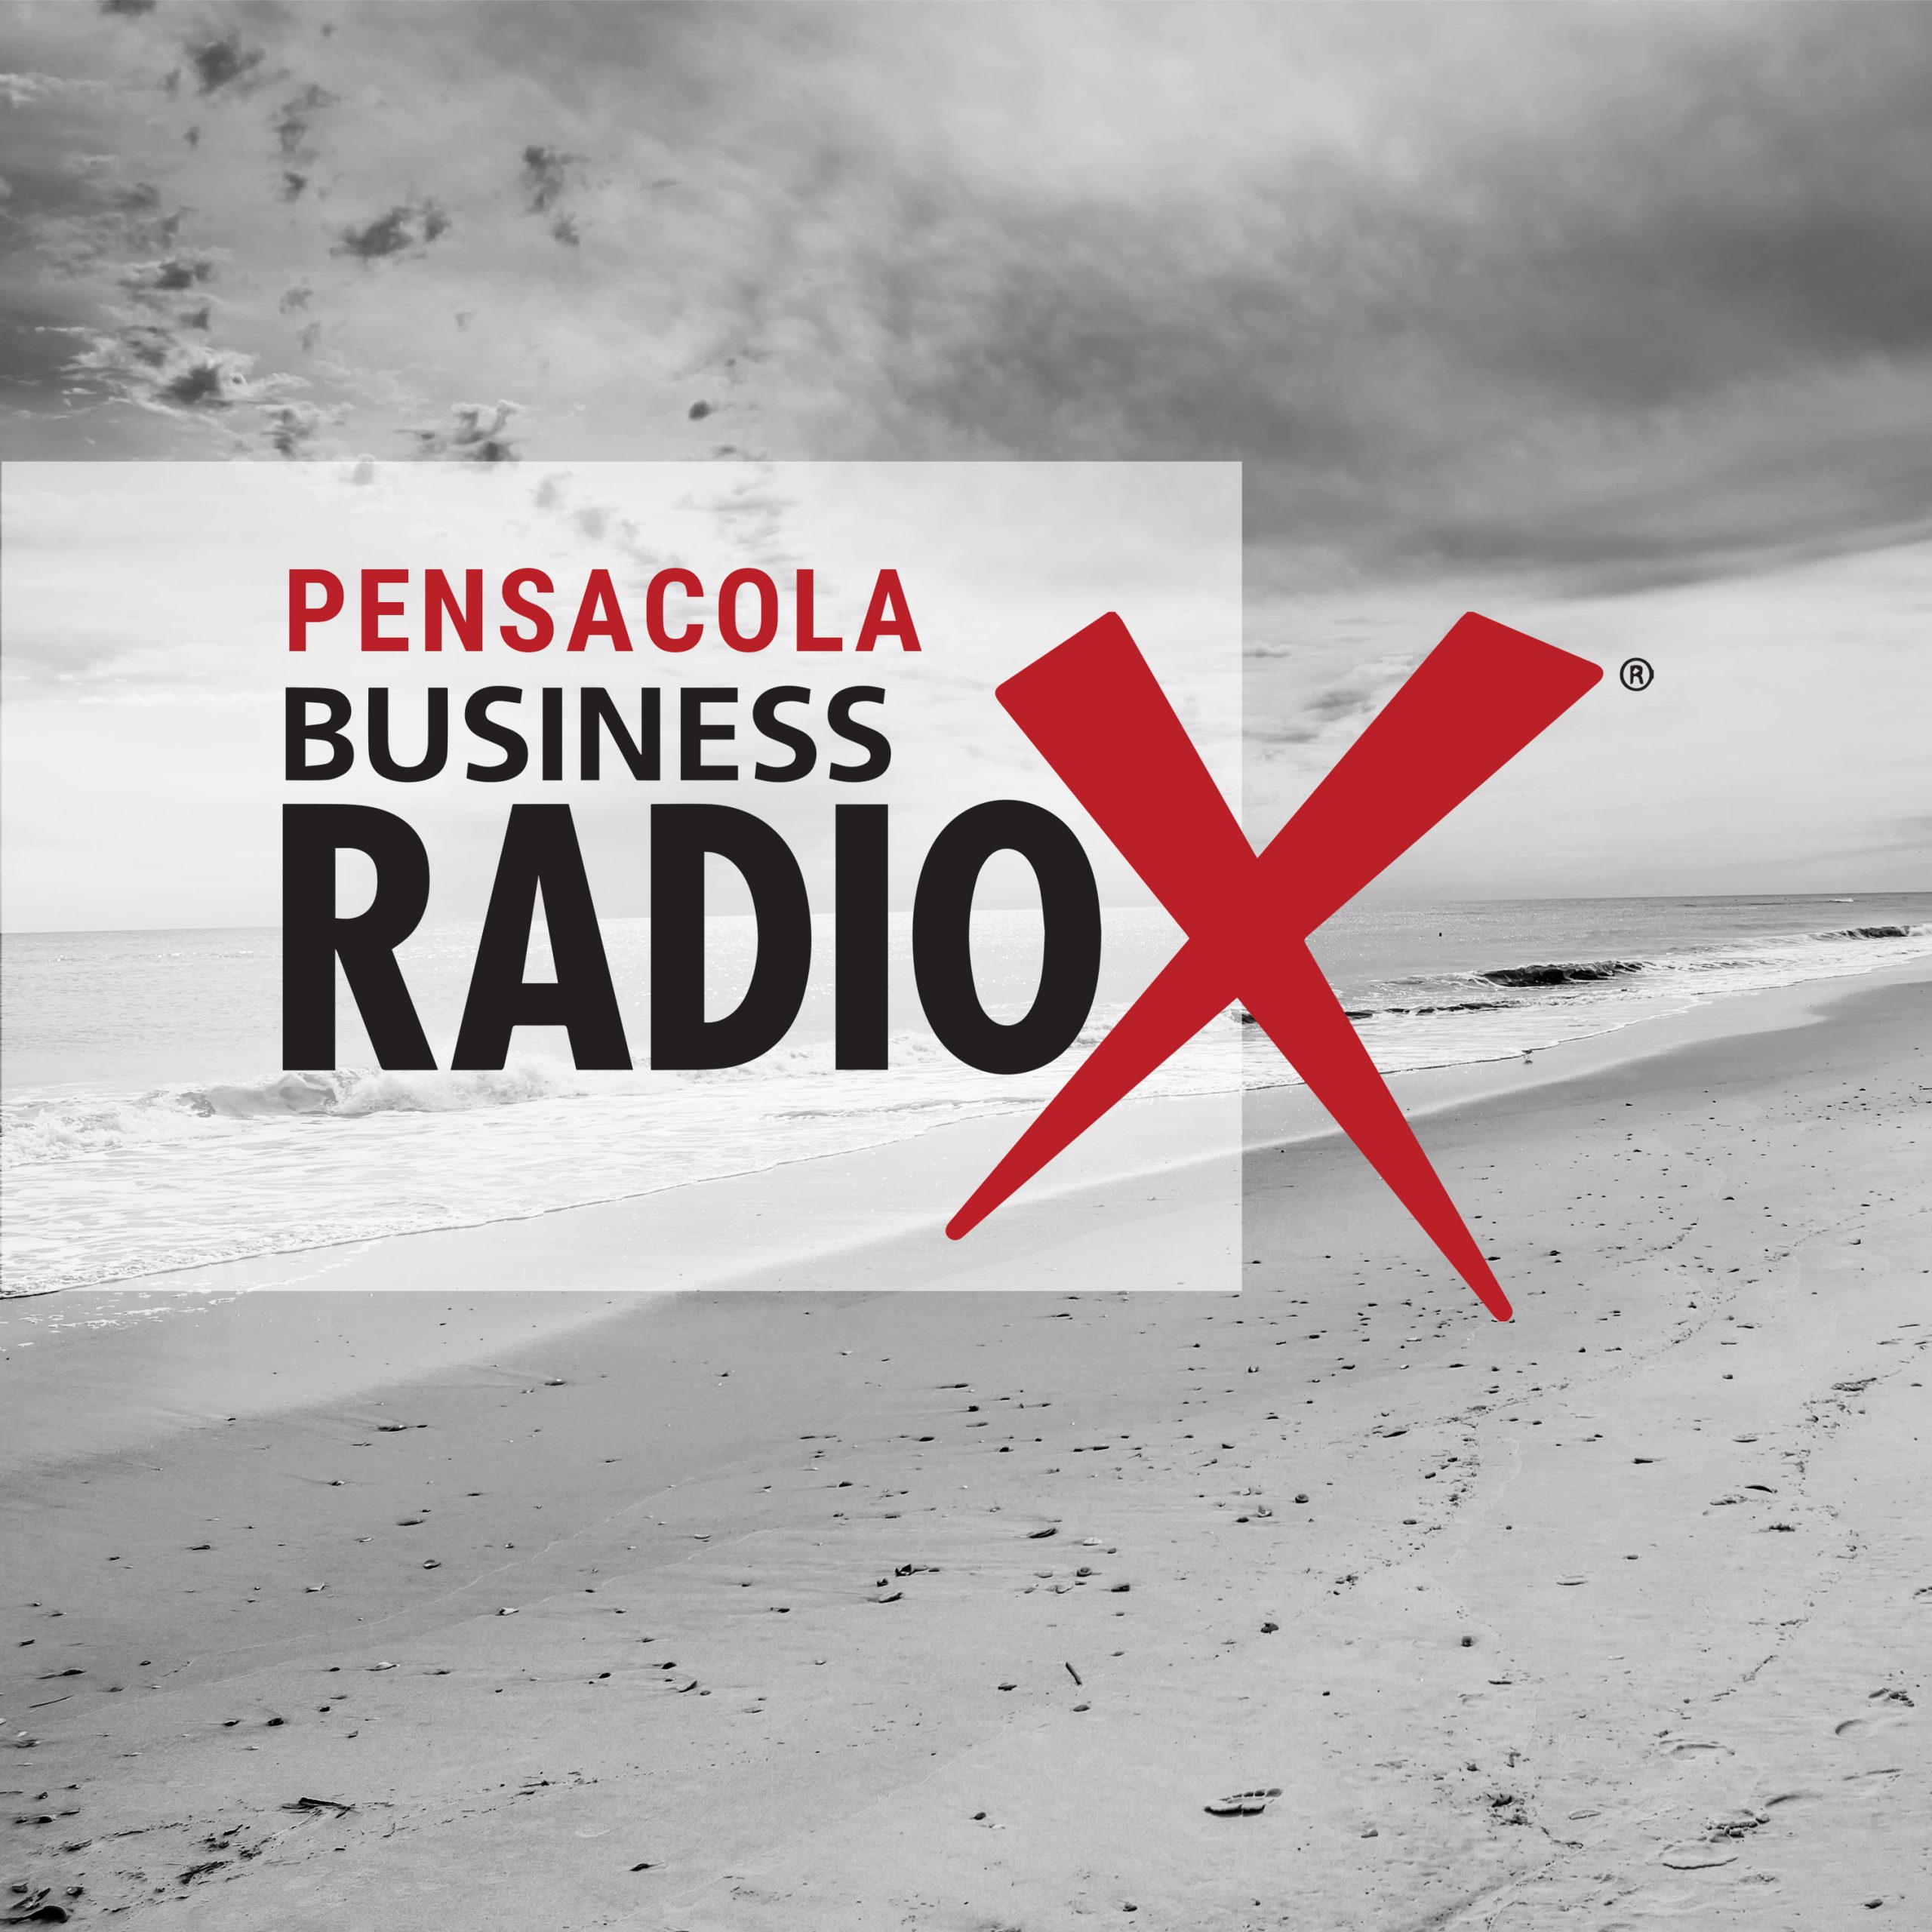 Pensacola Business Radio 1.5.16- Guests: Kristen Marks / My Pink Lawyer, Patti and Doc / MB Family Foods, Pat Murphy / Success…It’s Up To Me, Zach Cockfield / Comprehensive Wealth Management